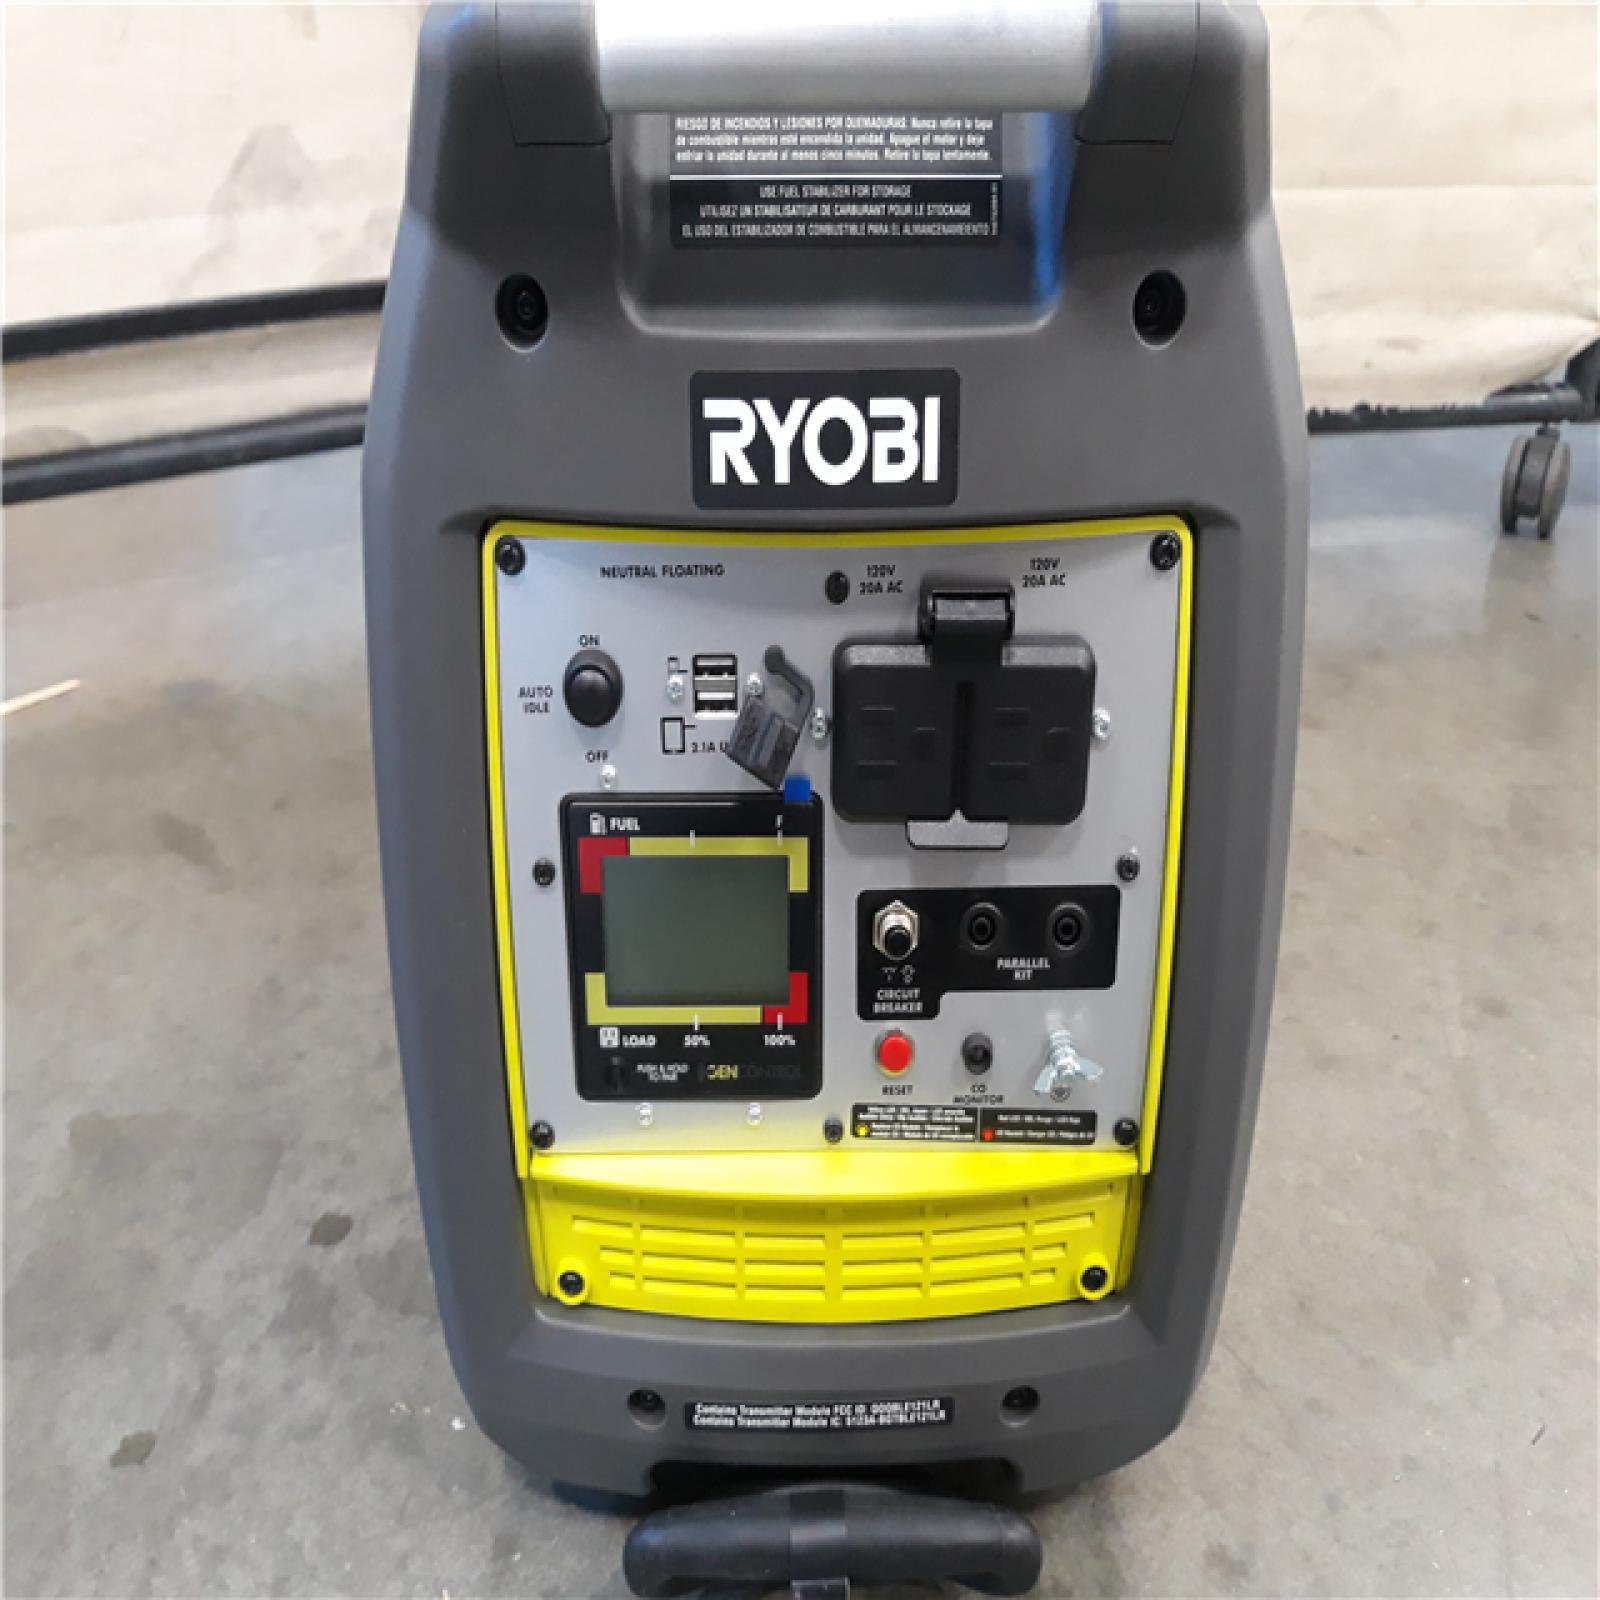 California AS-IS Ryobi 2300 Inverter Generator - Appears in Like-New Condition